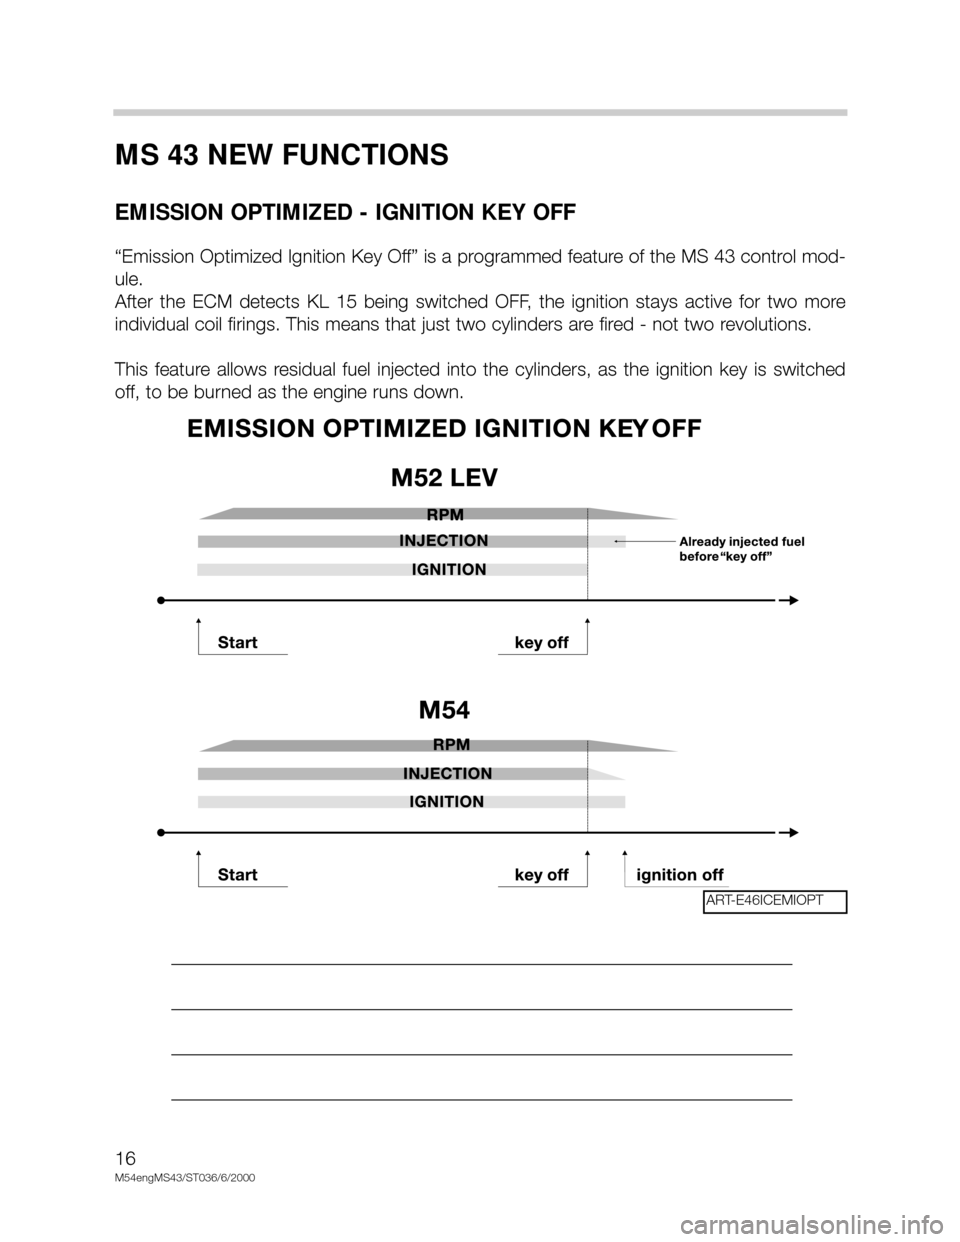 BMW X5 2005 E53 M54 Engine Workshop Manual 16
M54engMS43/ST036/6/2000
MS 43 NEW FUNCTIONS
EMISSION OPTIMIZED - IGNITION KEY OFF
“Emission Optimized Ignition Key Off” is a programmed feature of the MS 43 control mod-
ule. 
After  the  ECM  